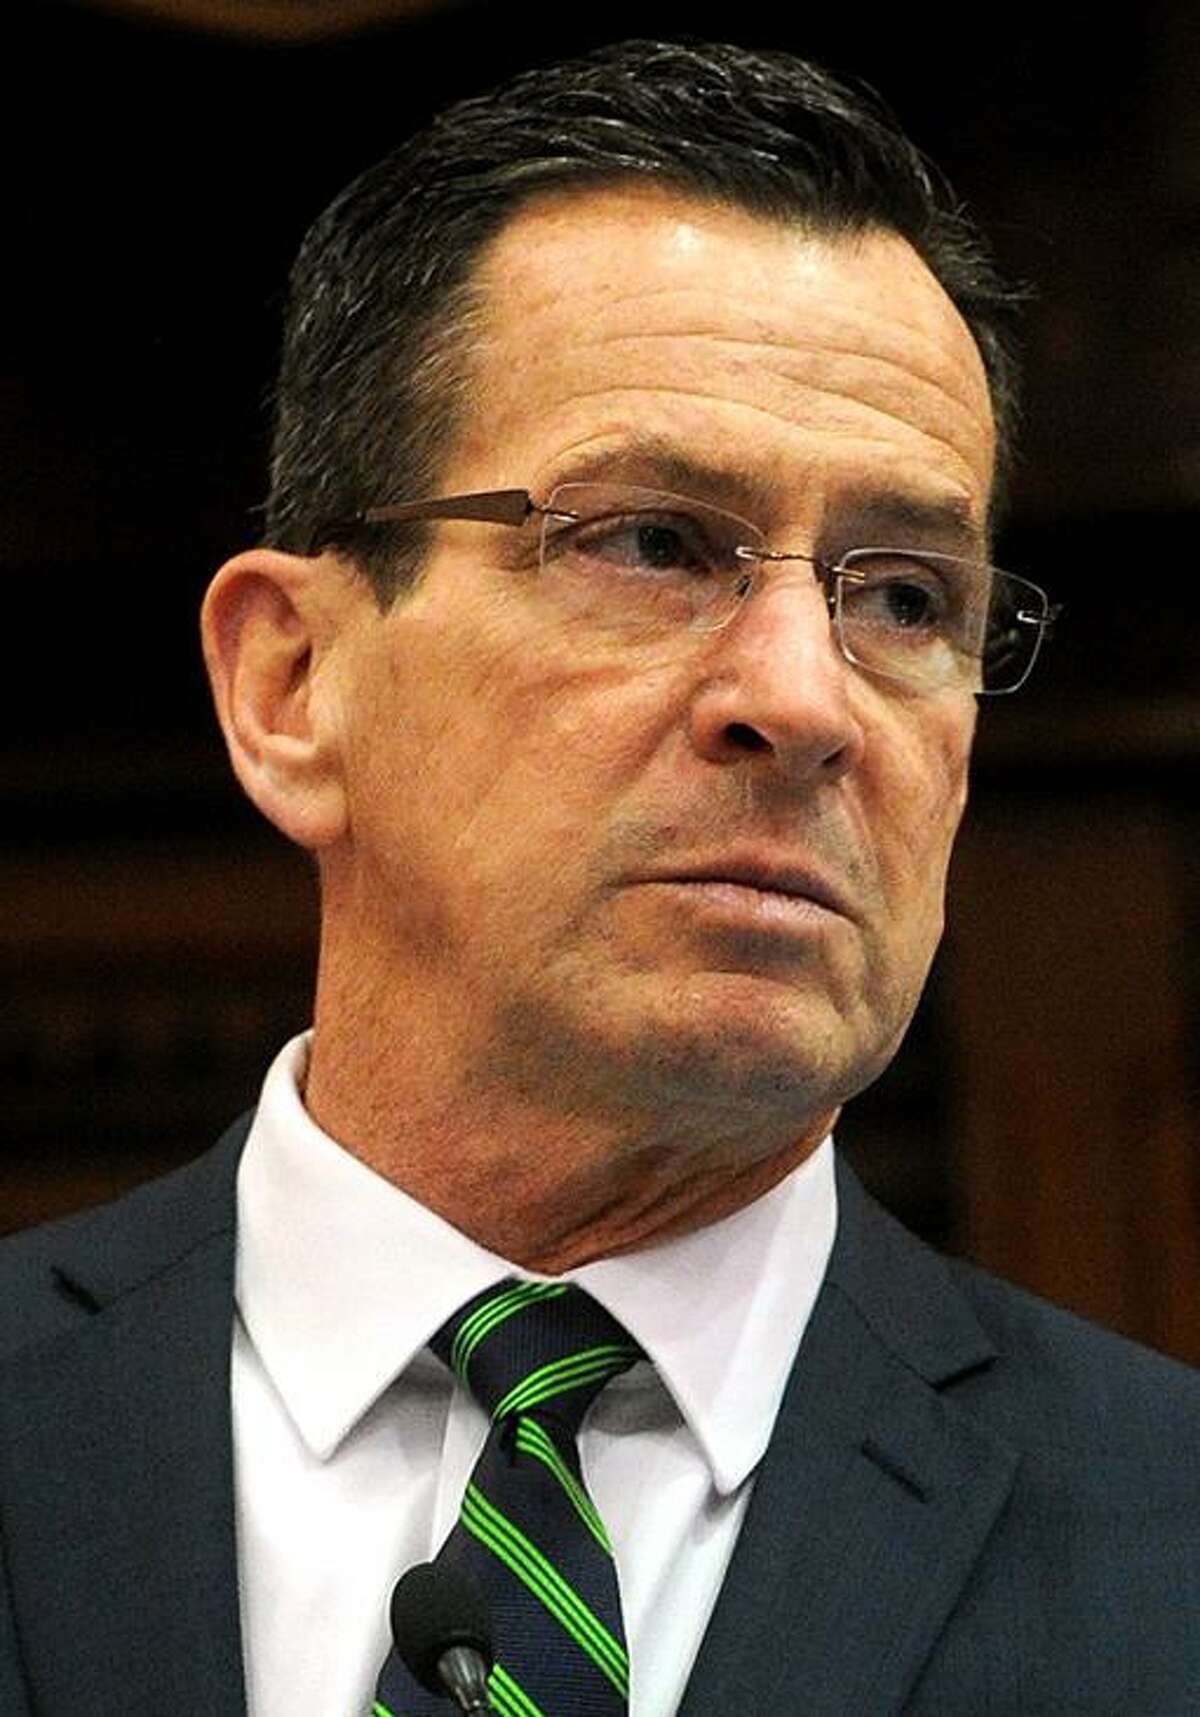 Gov. Dannel P. Malloy on Tuesday said he would not support an effort to eliminate a tax loophole for wealthy hedge fund executives.